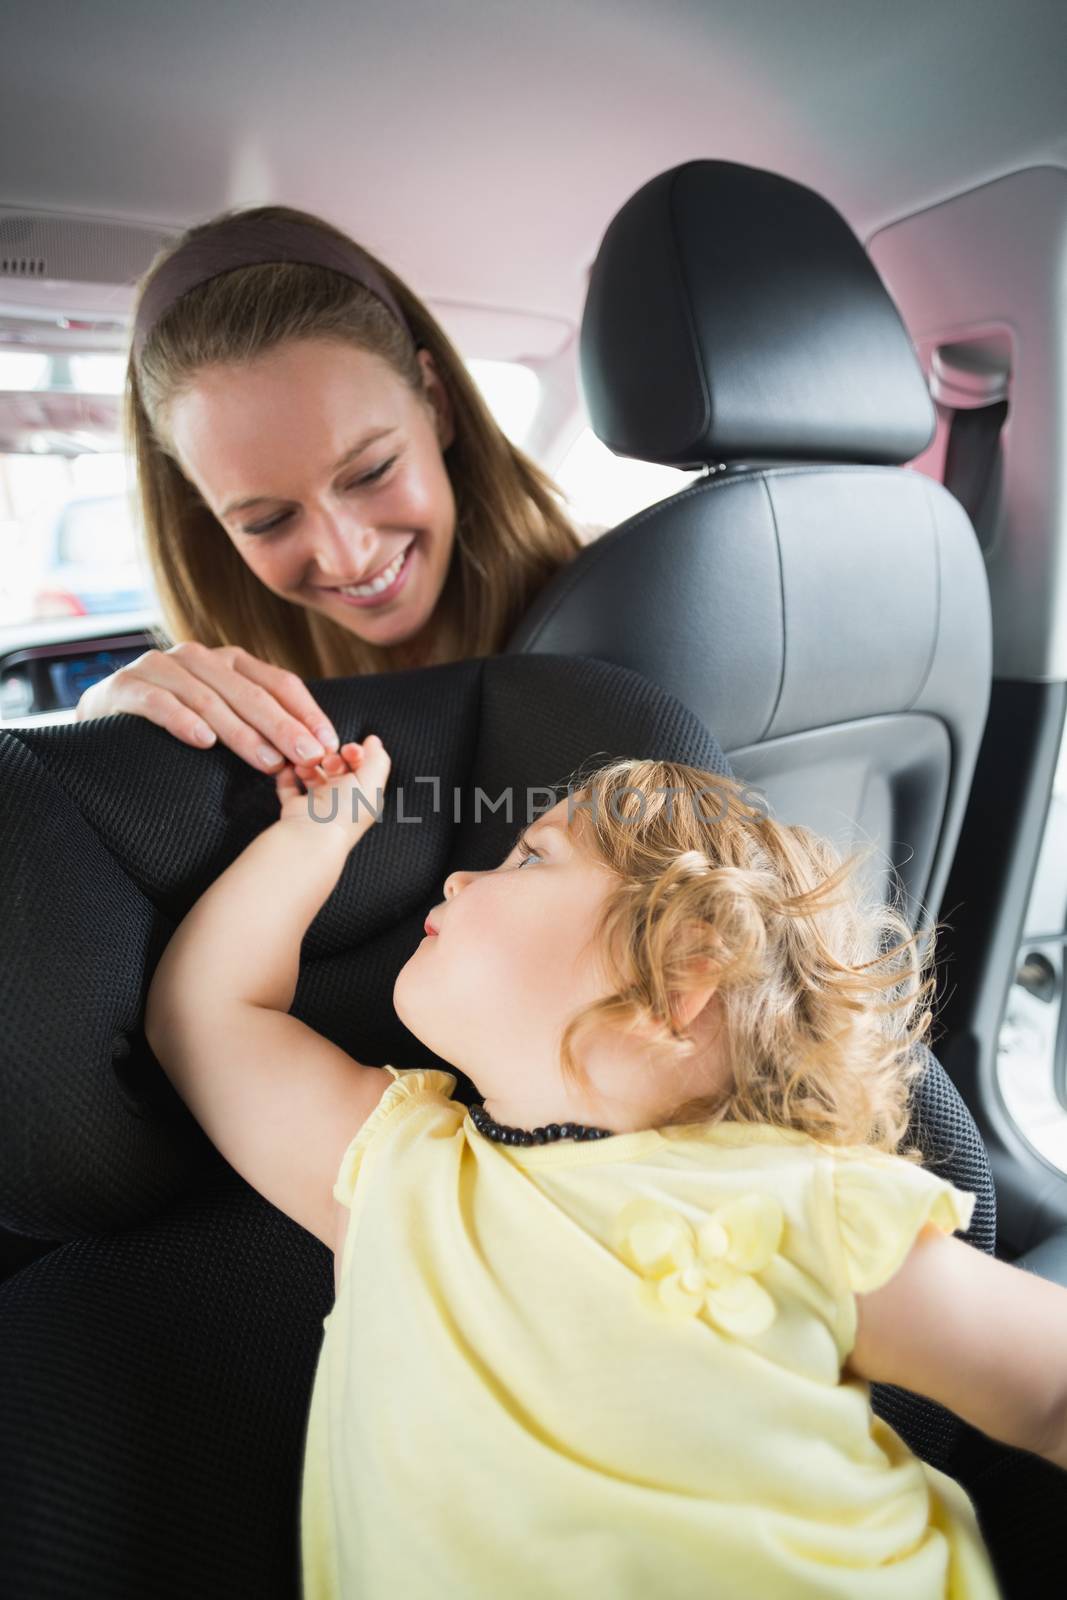 Mother checking her baby in the car seat in her car